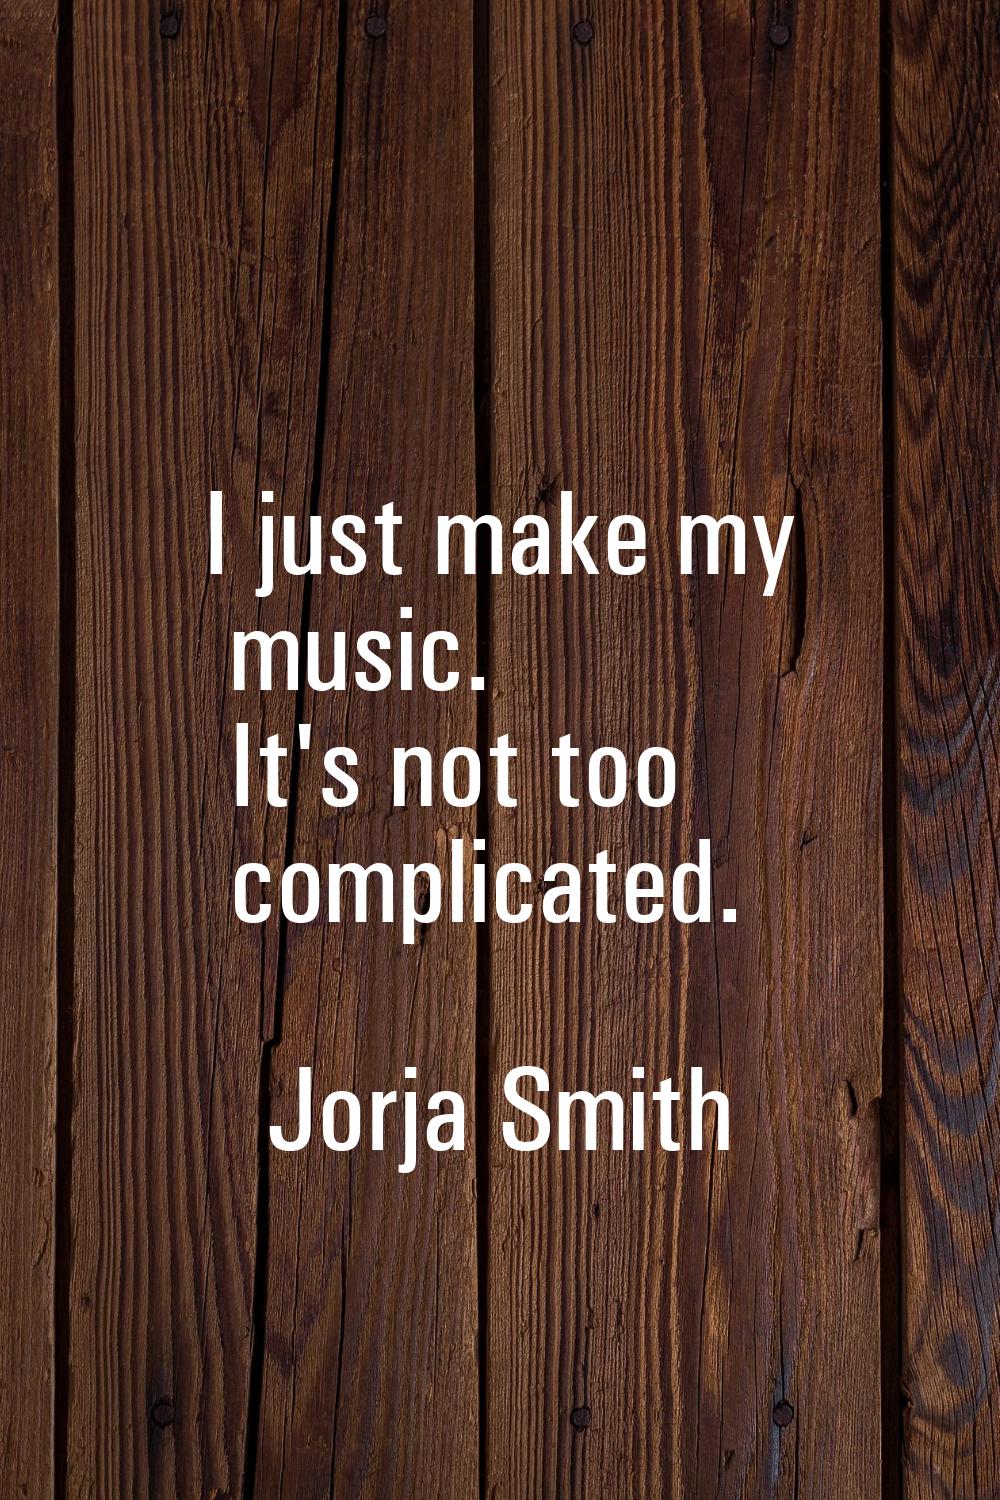 I just make my music. It's not too complicated.